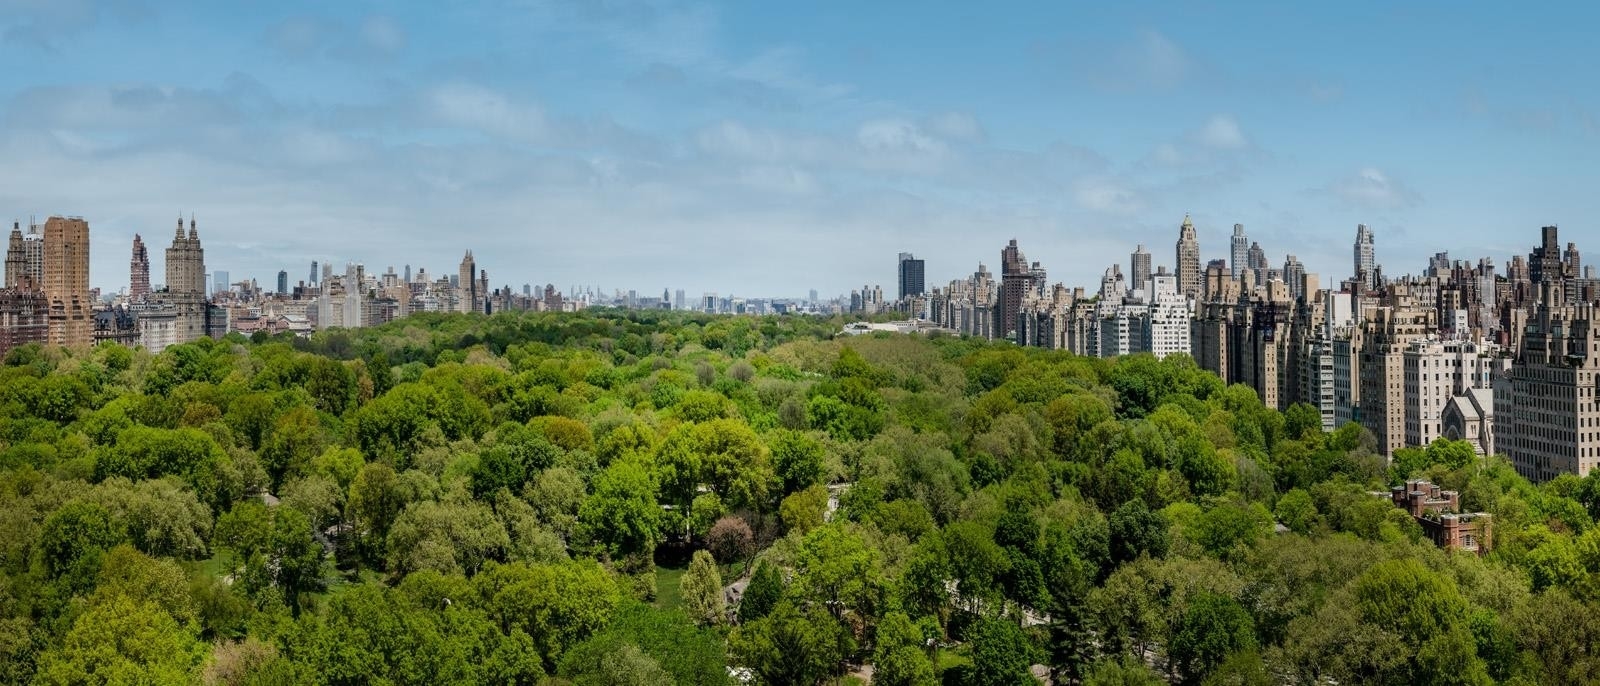 9. Condominiums for Sale at Residences At Ritz-Carlton, 50 CENTRAL PARK S, PH23 Central Park South, New York, NY 10019